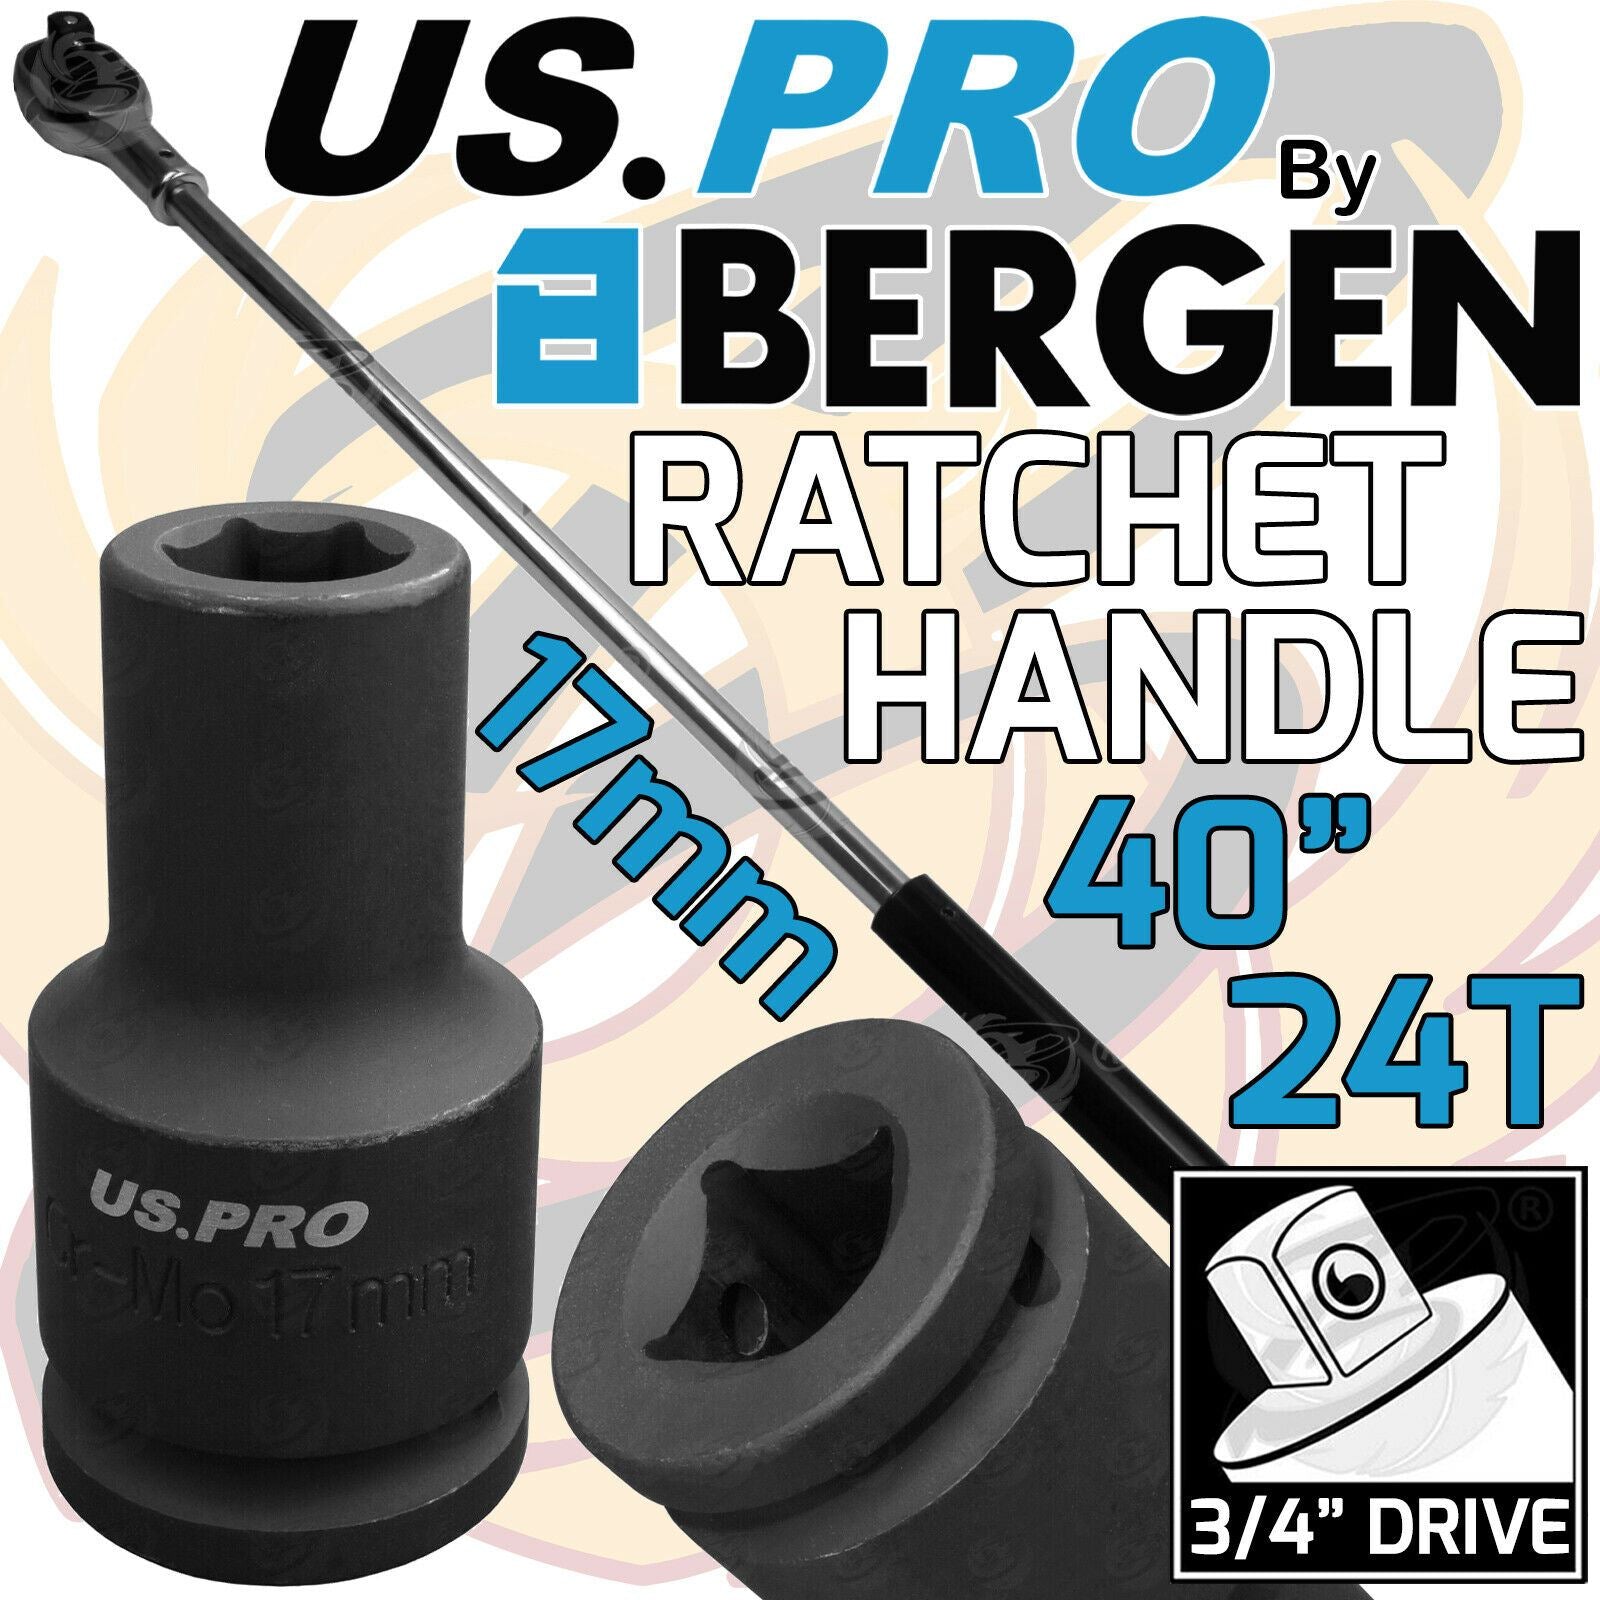 US PRO 3/4" DRIVE 24 TOOTH 1000MM LONG RATCHET HANDLE & 17MM 6 POINT DEEP IMPACT SOCKET